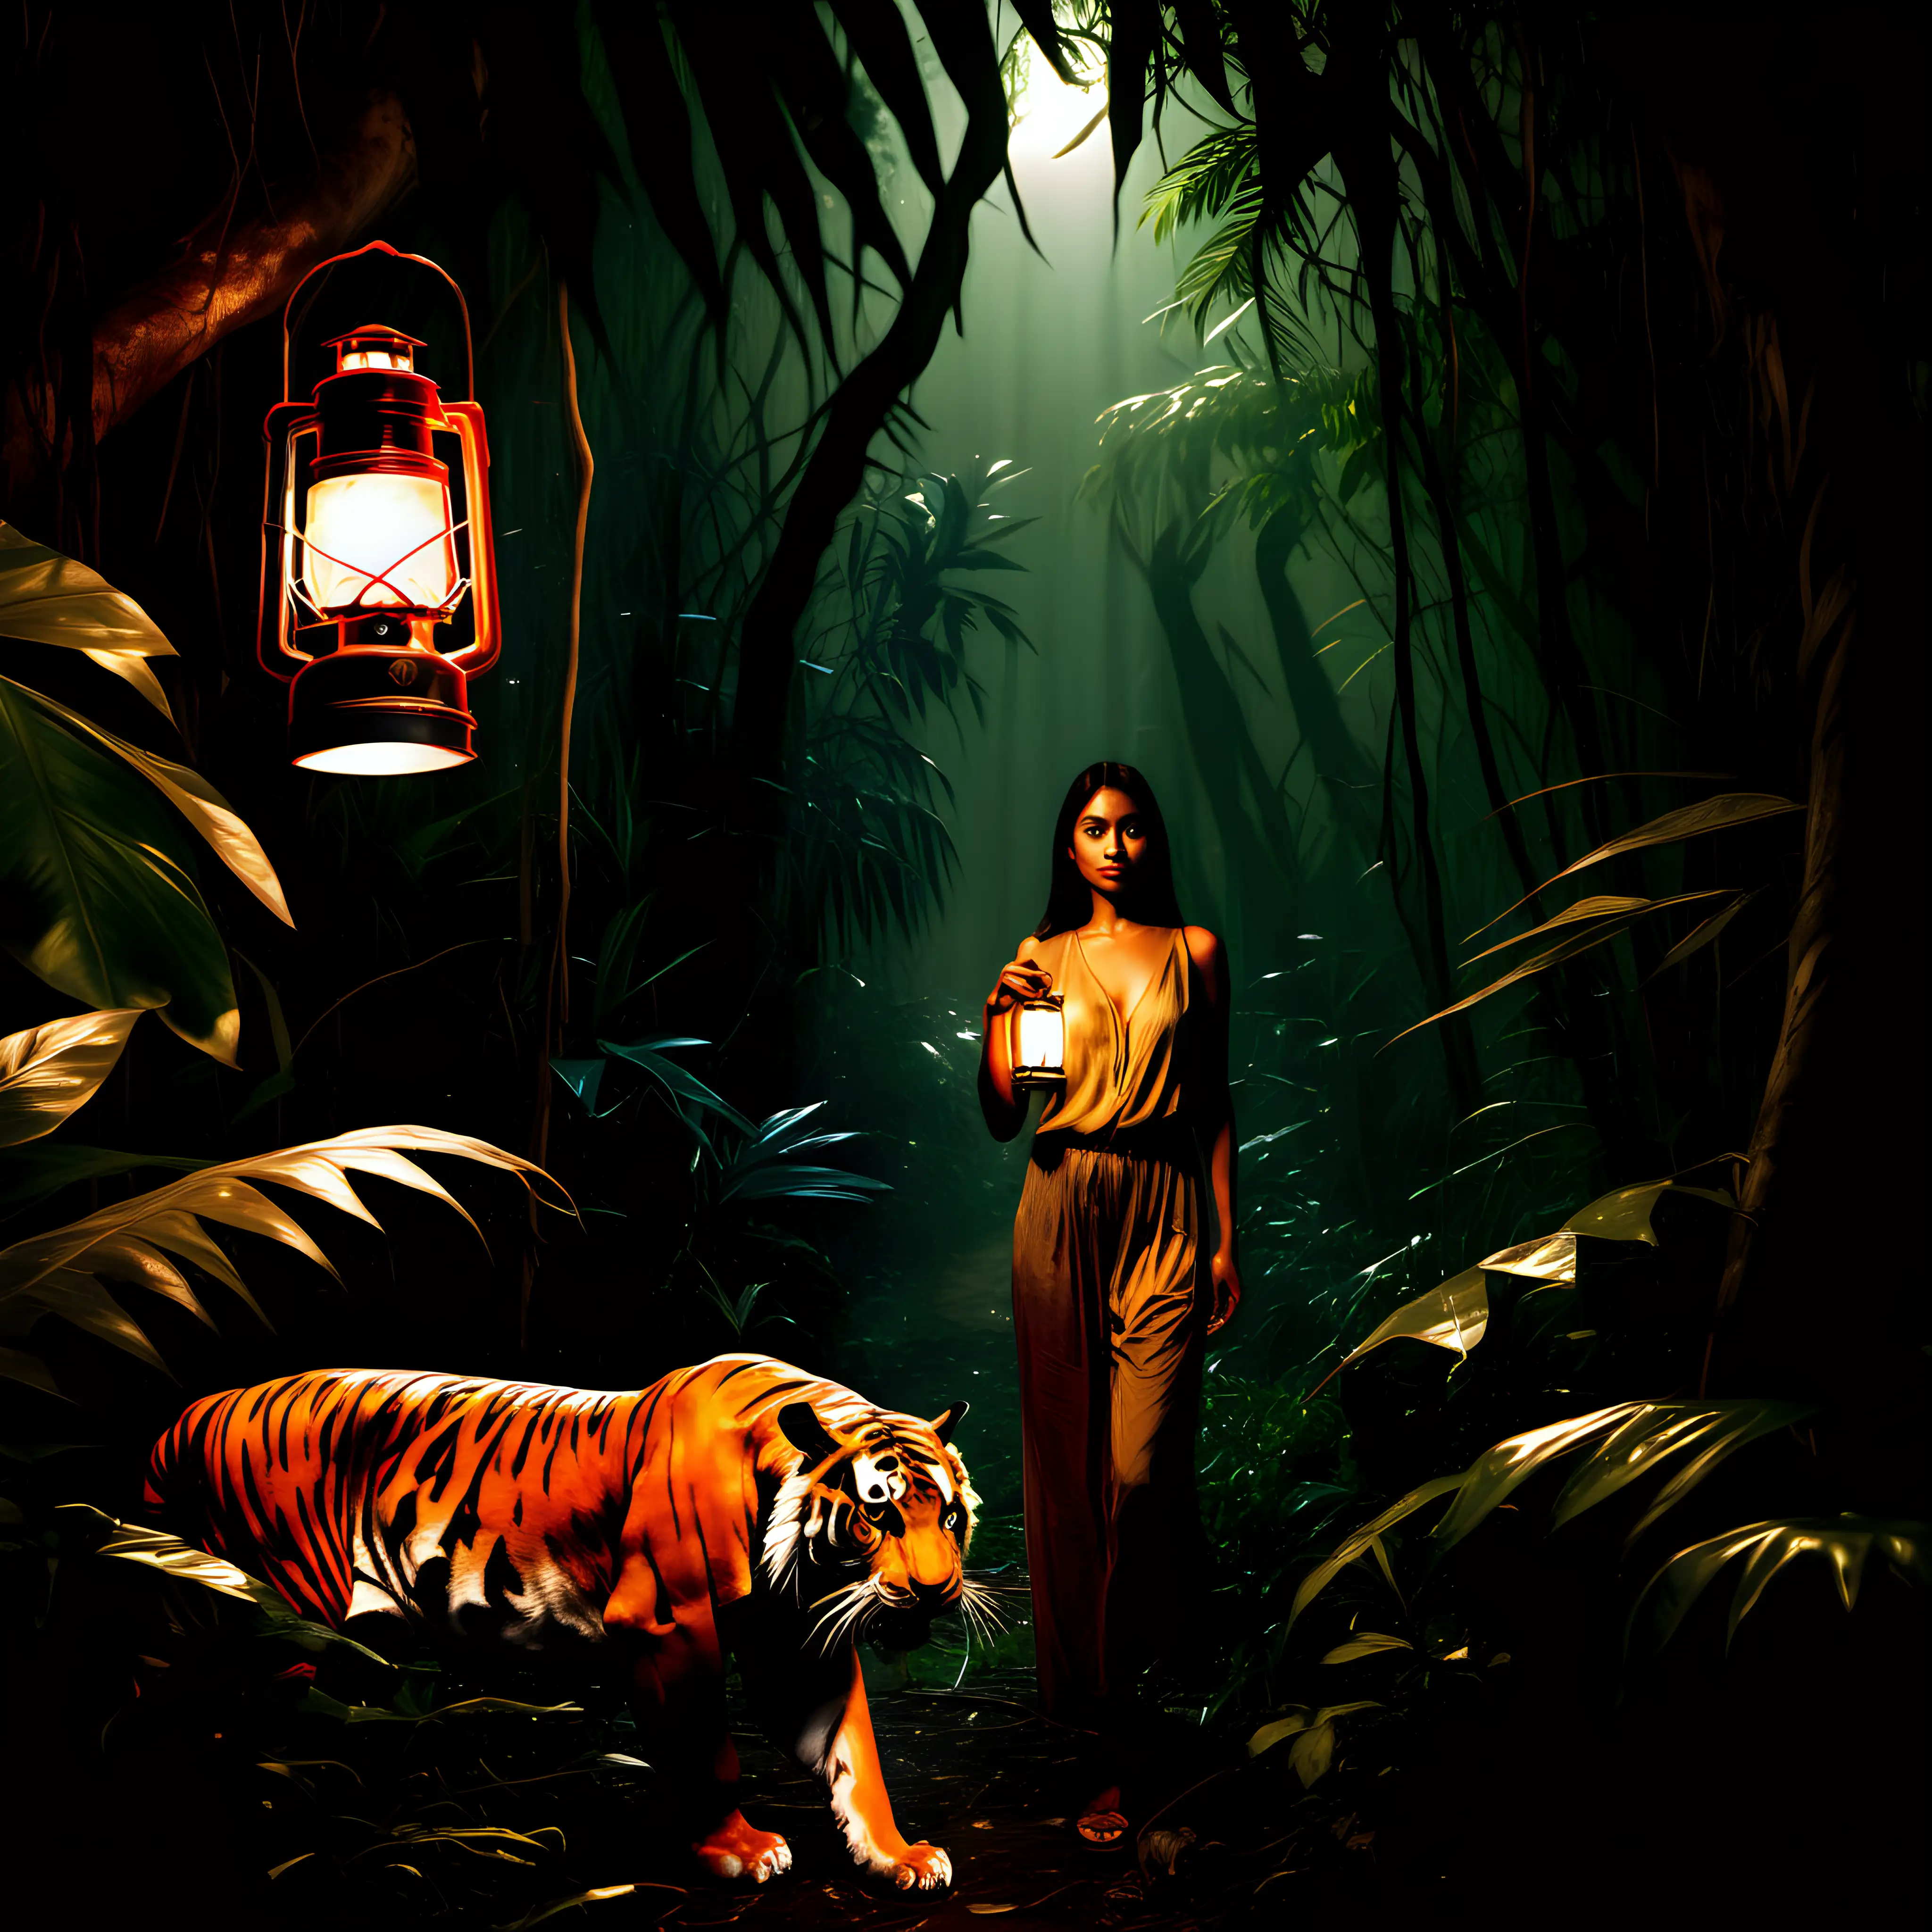 lady in jungle with lantern light, tiger in the shadows